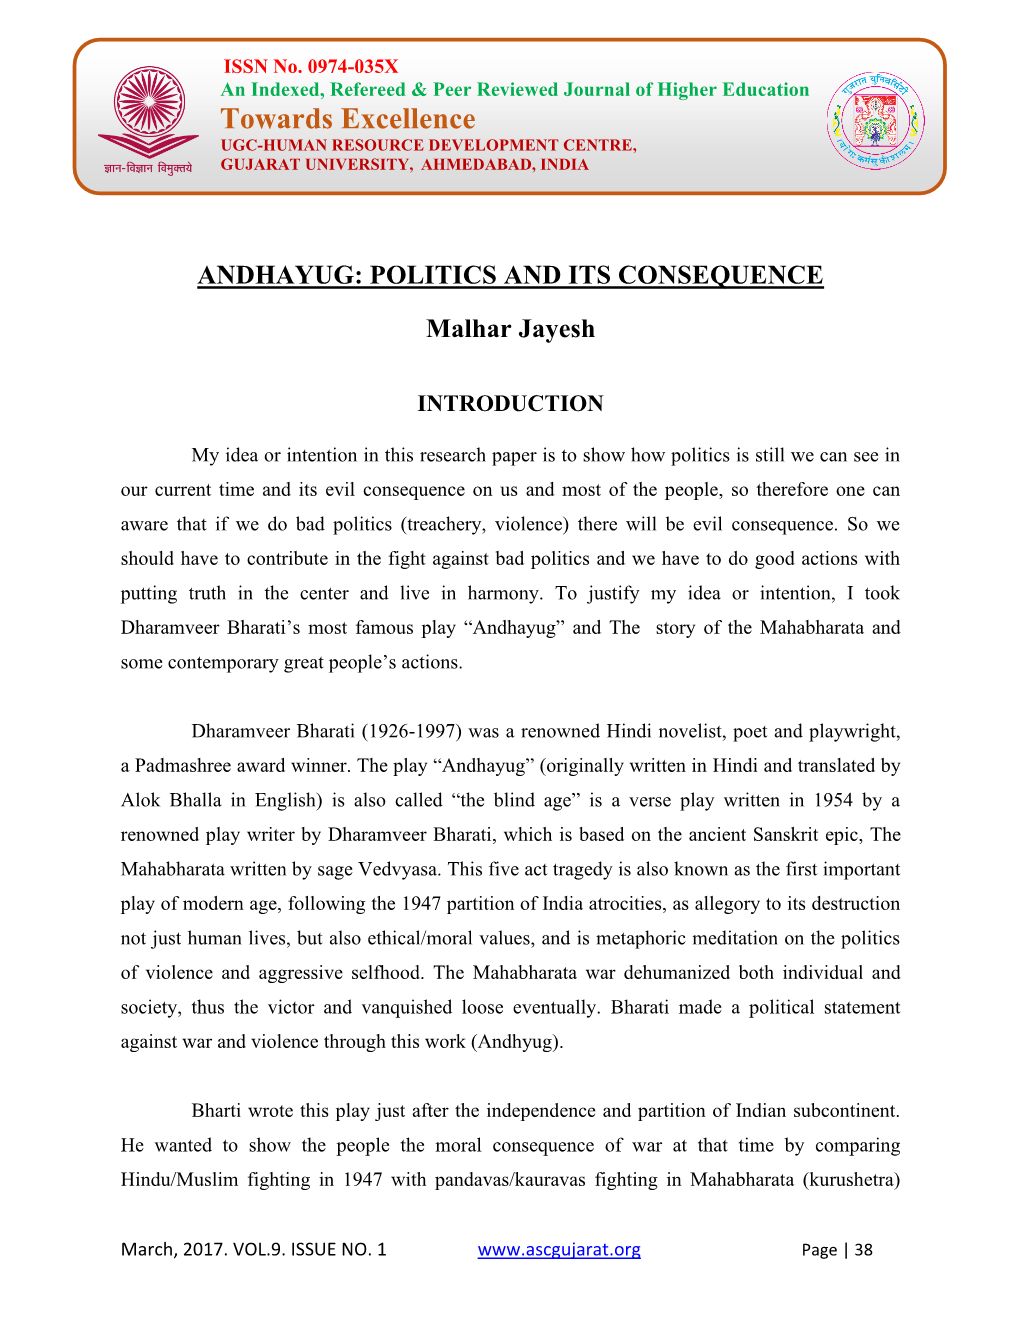 Andhayug: Politics and Its Consequence